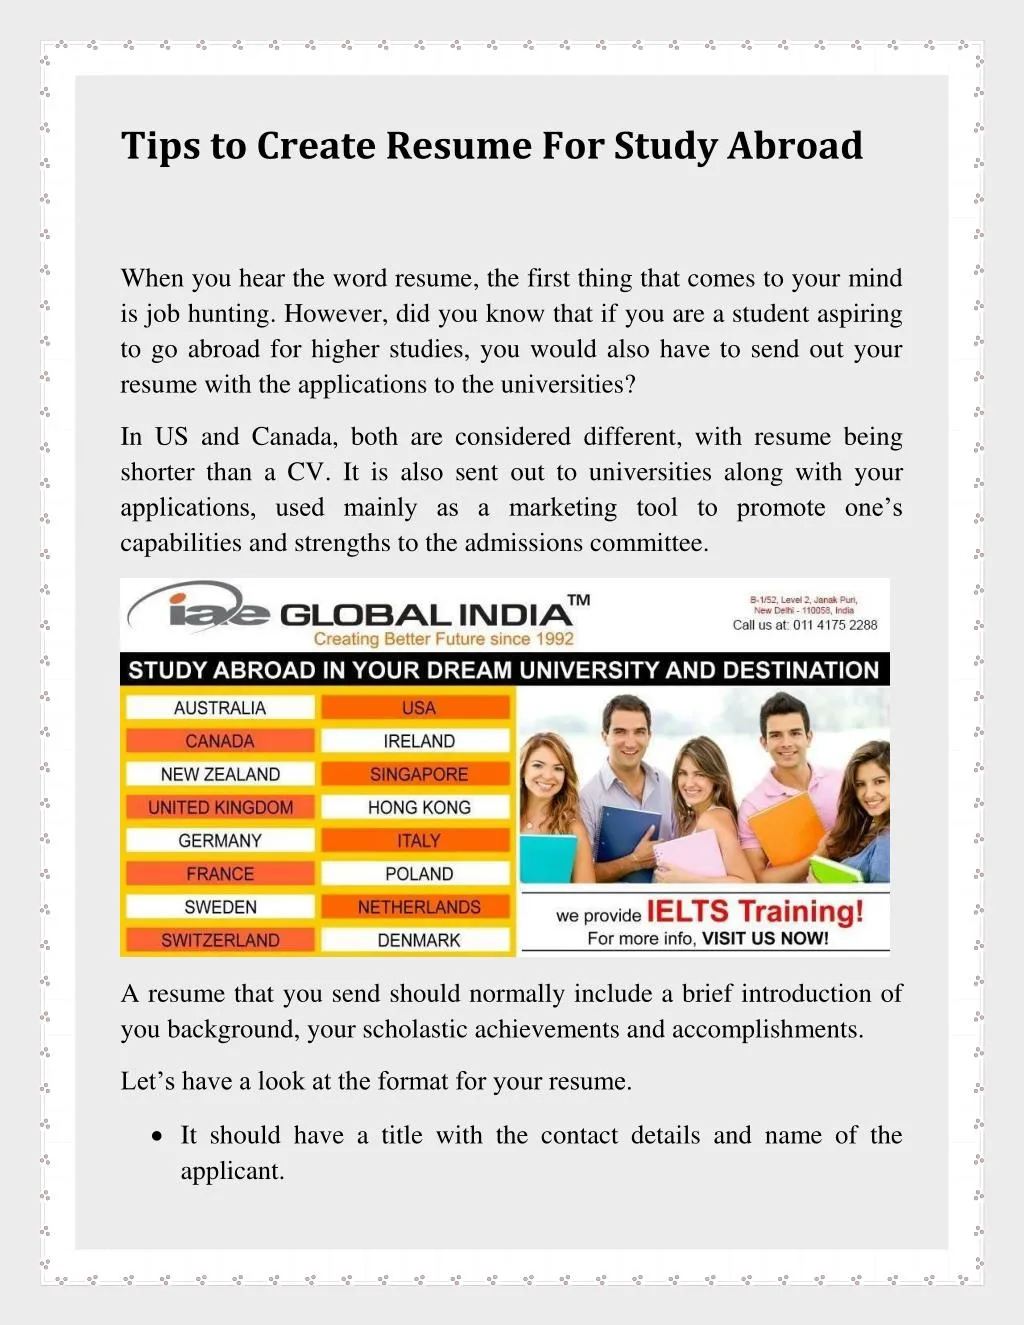 tips to create resume for study abroad